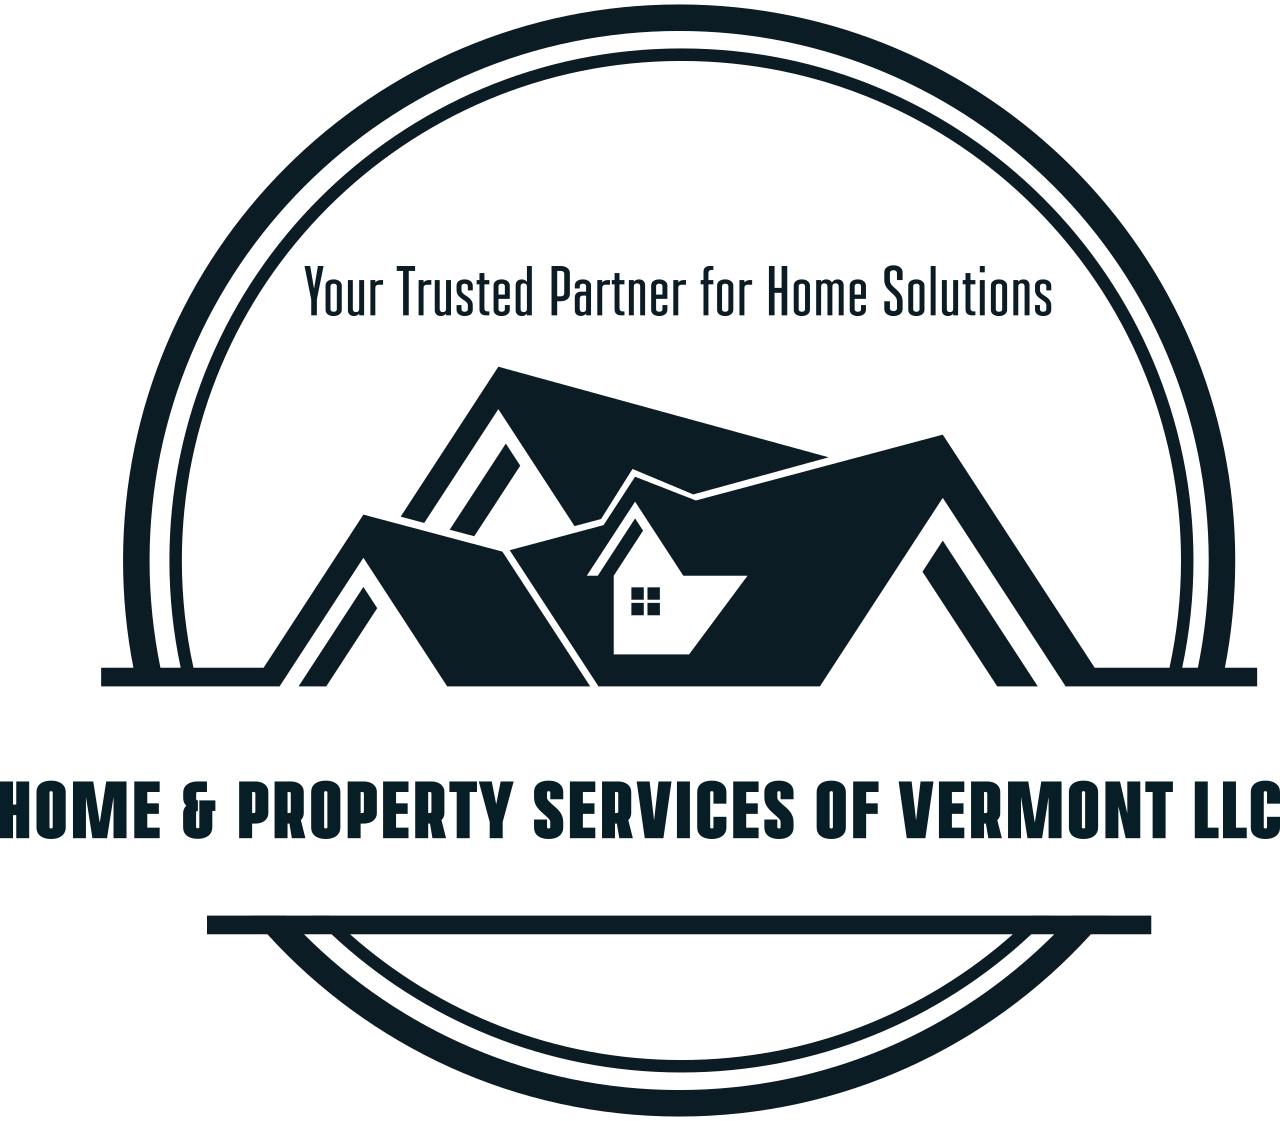 HOME & PROPERTY SERVICES OF VERMONT LLC's logo